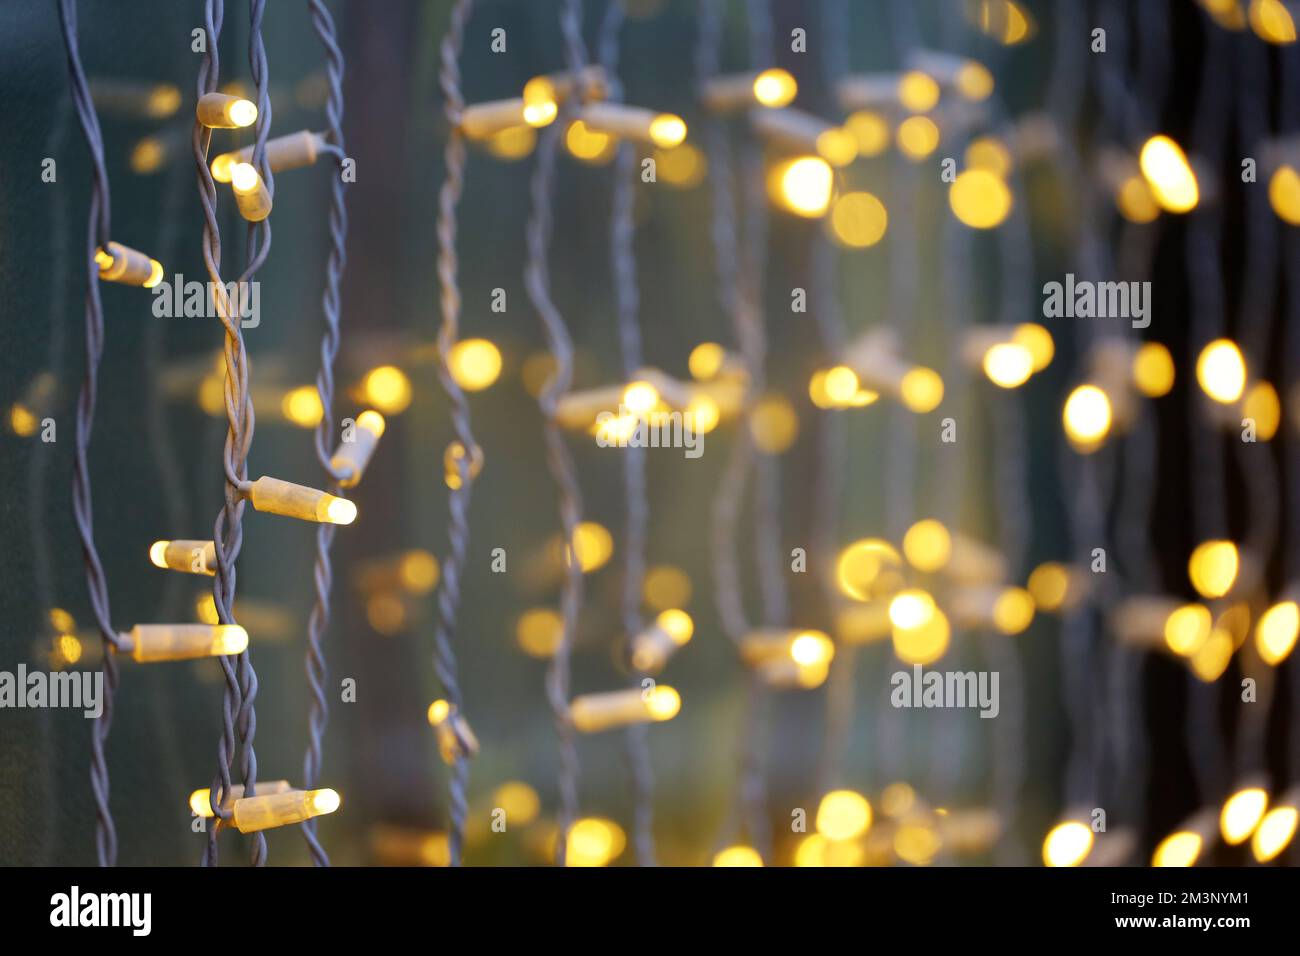 Festive lights on electric garlands. Christmas decorations, New Year illumination in window on city street Stock Photo